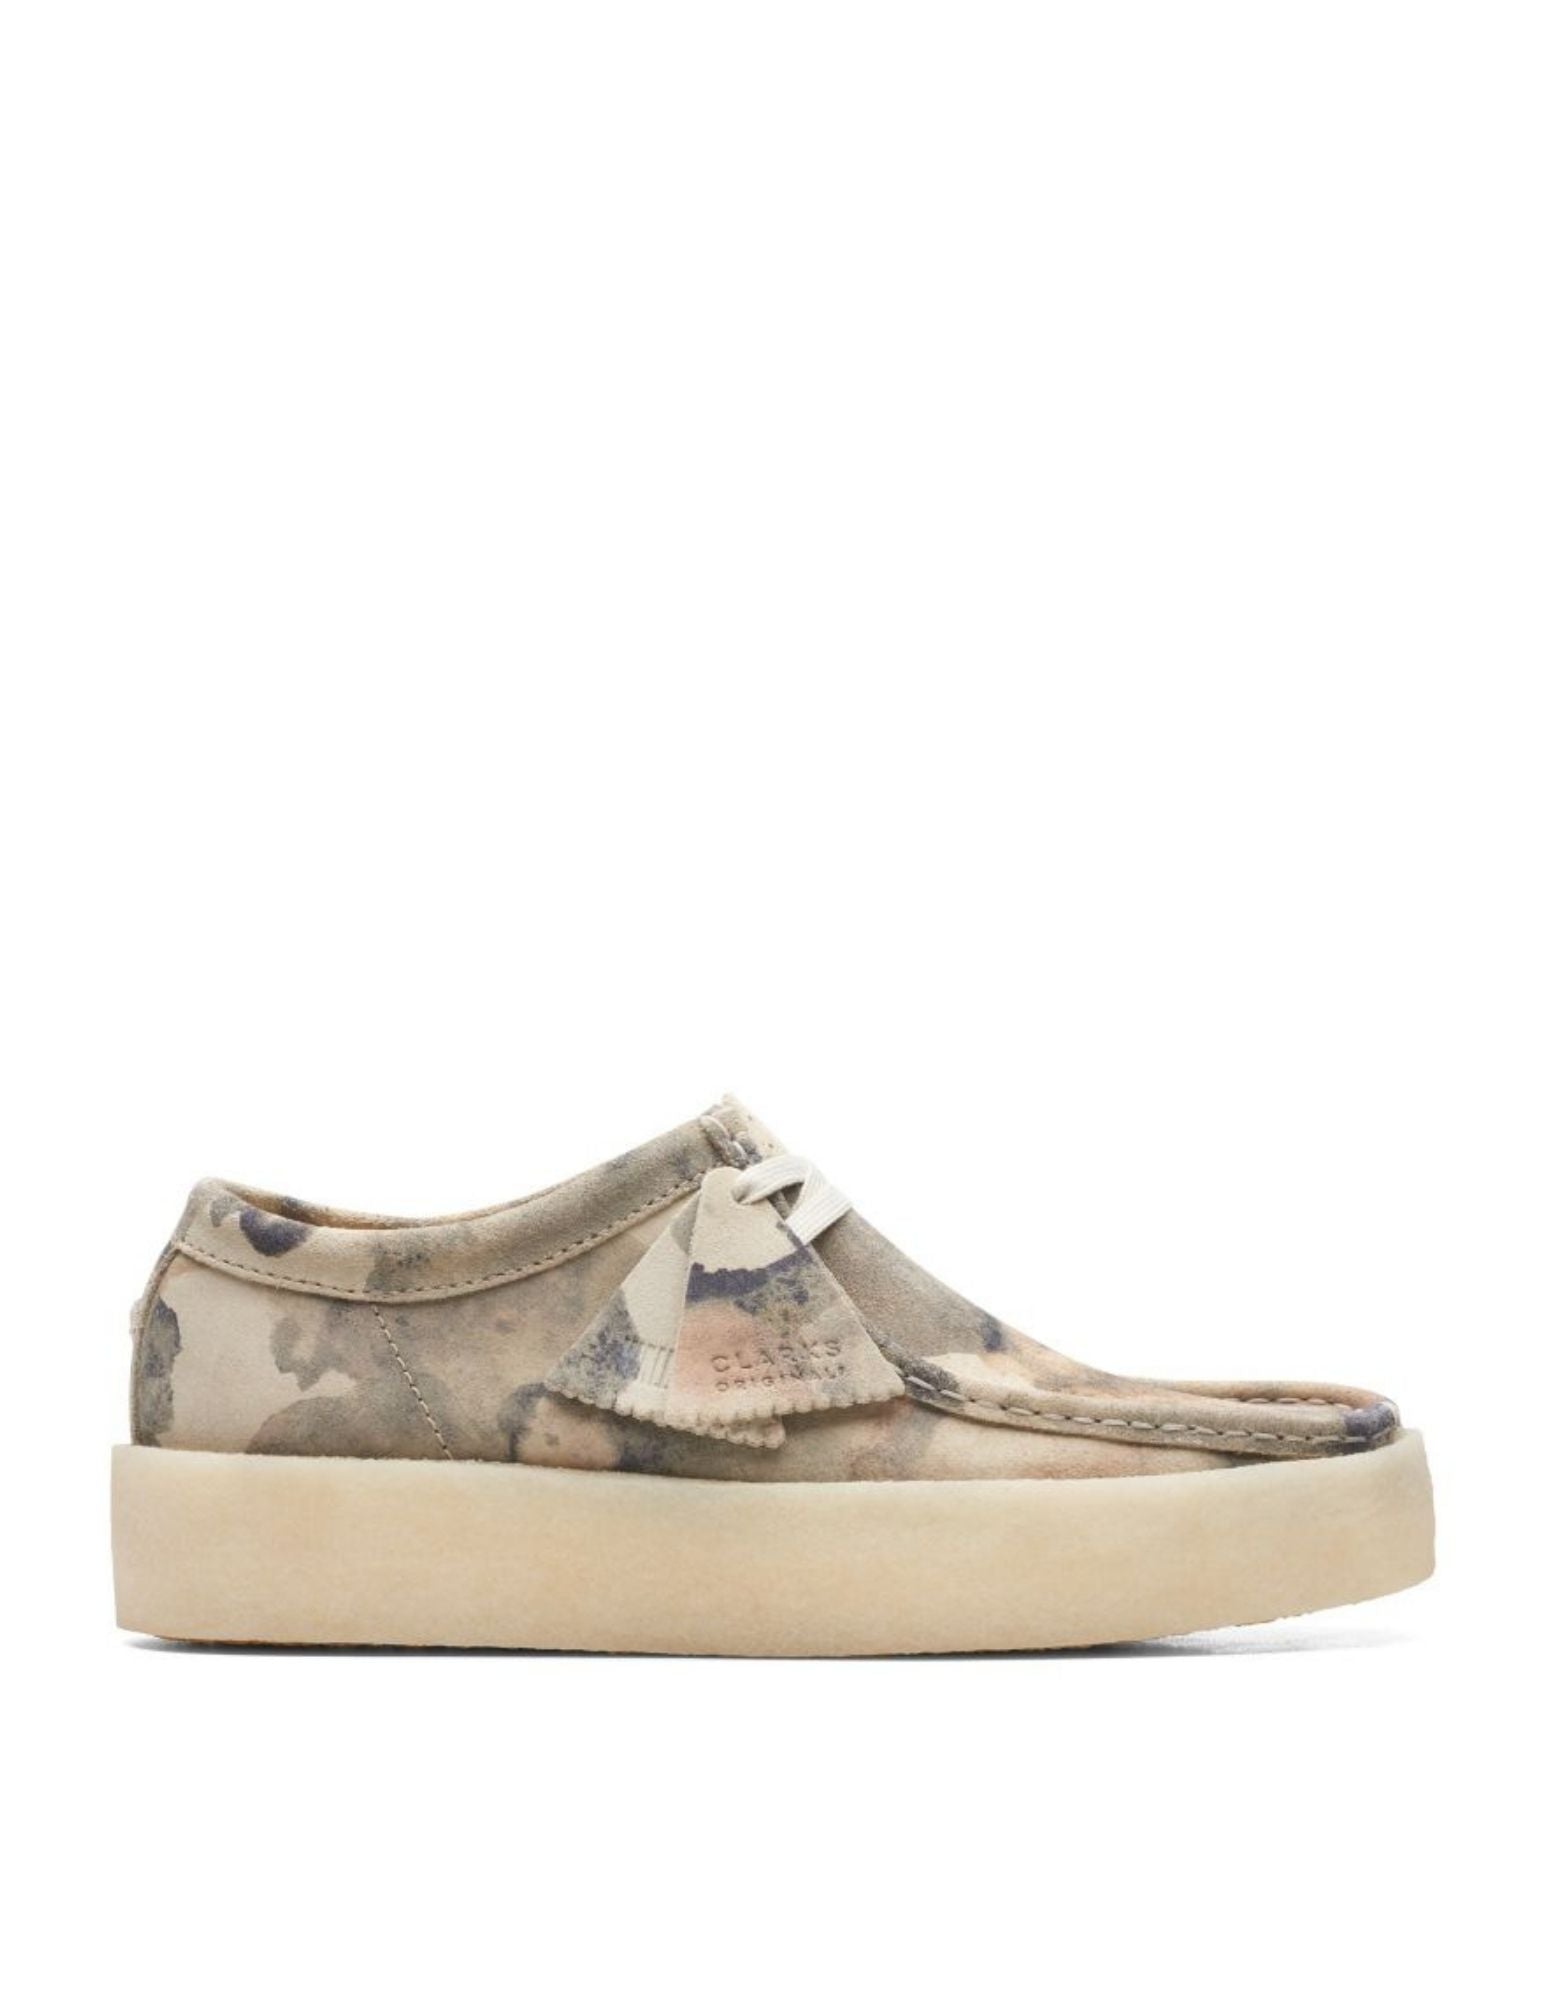 Clarks Wallabee Cup Off White Camo